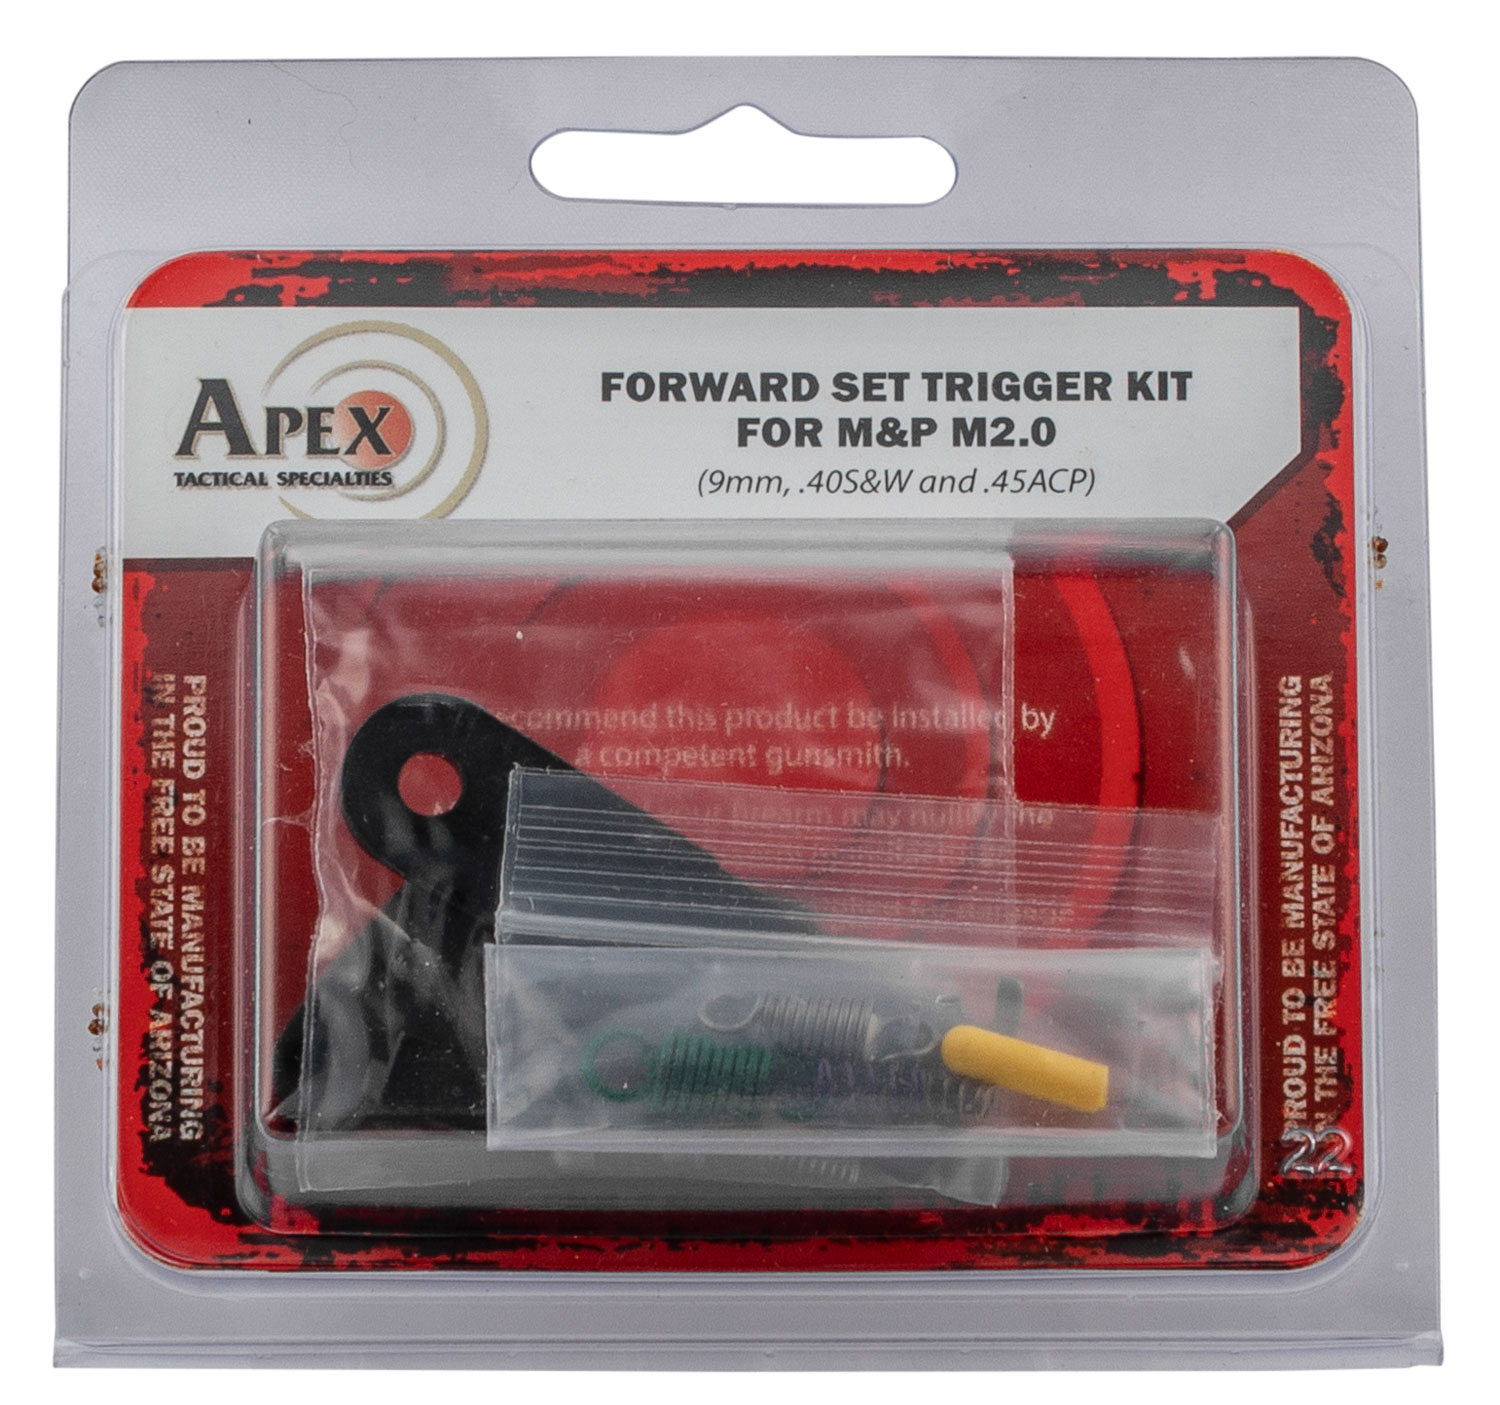 Apex Tactical 100167 Forward Set Sear & Trigger Kit Curved Trigger with 3-4 lbs Draw Weight for S&W M&P 2.0 Right